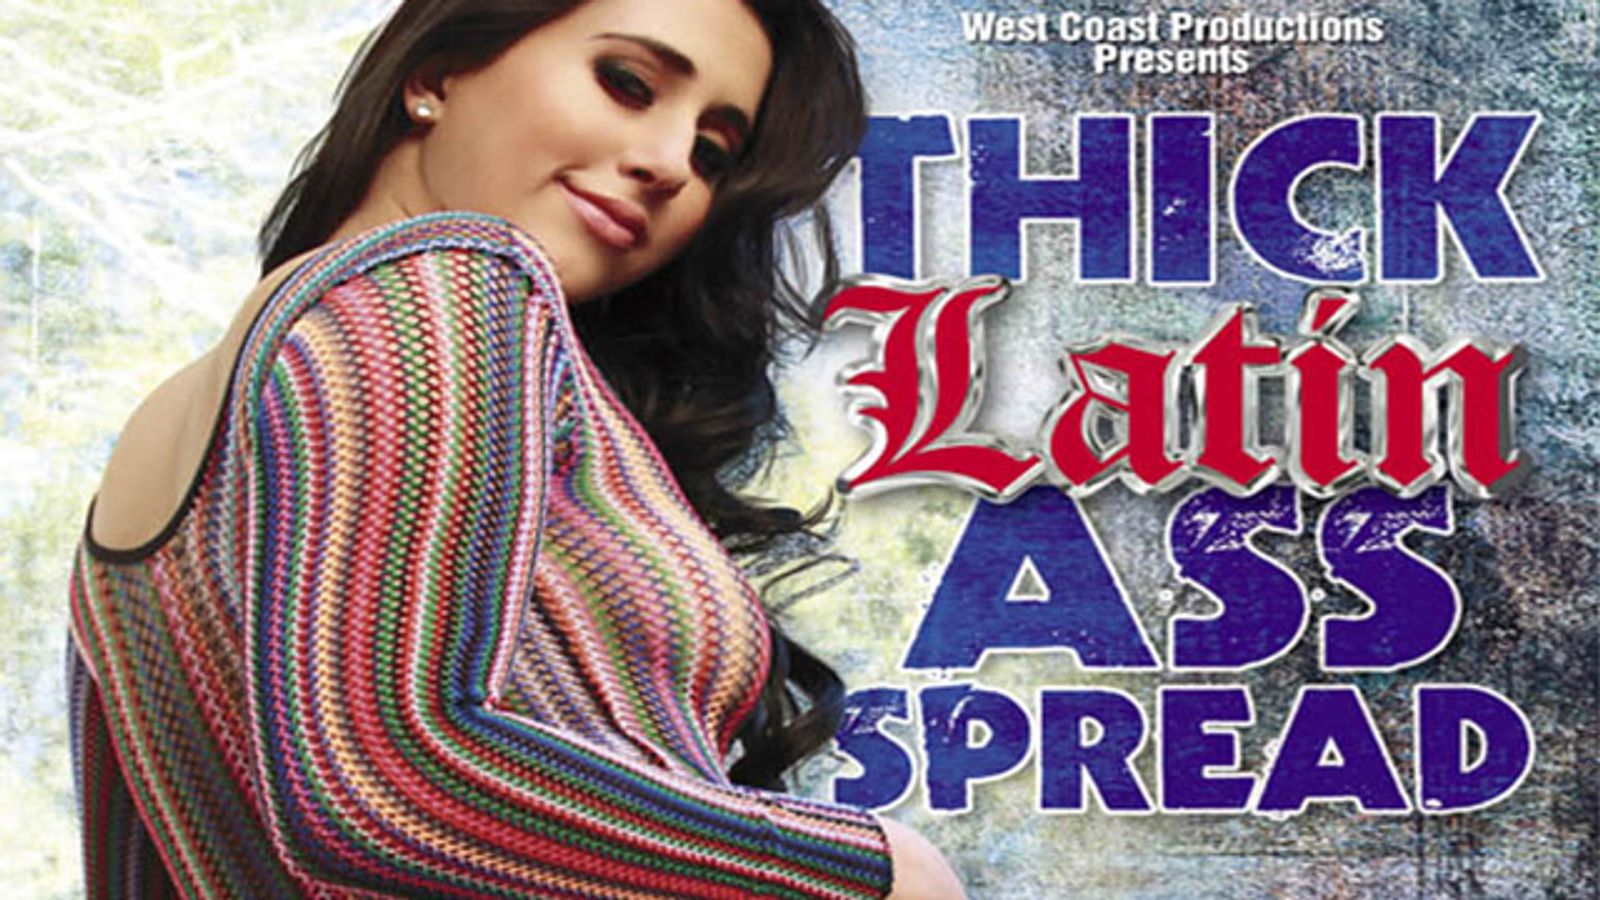 West Coast Productions Serves Up a ‘Thick Latin Ass Spread’